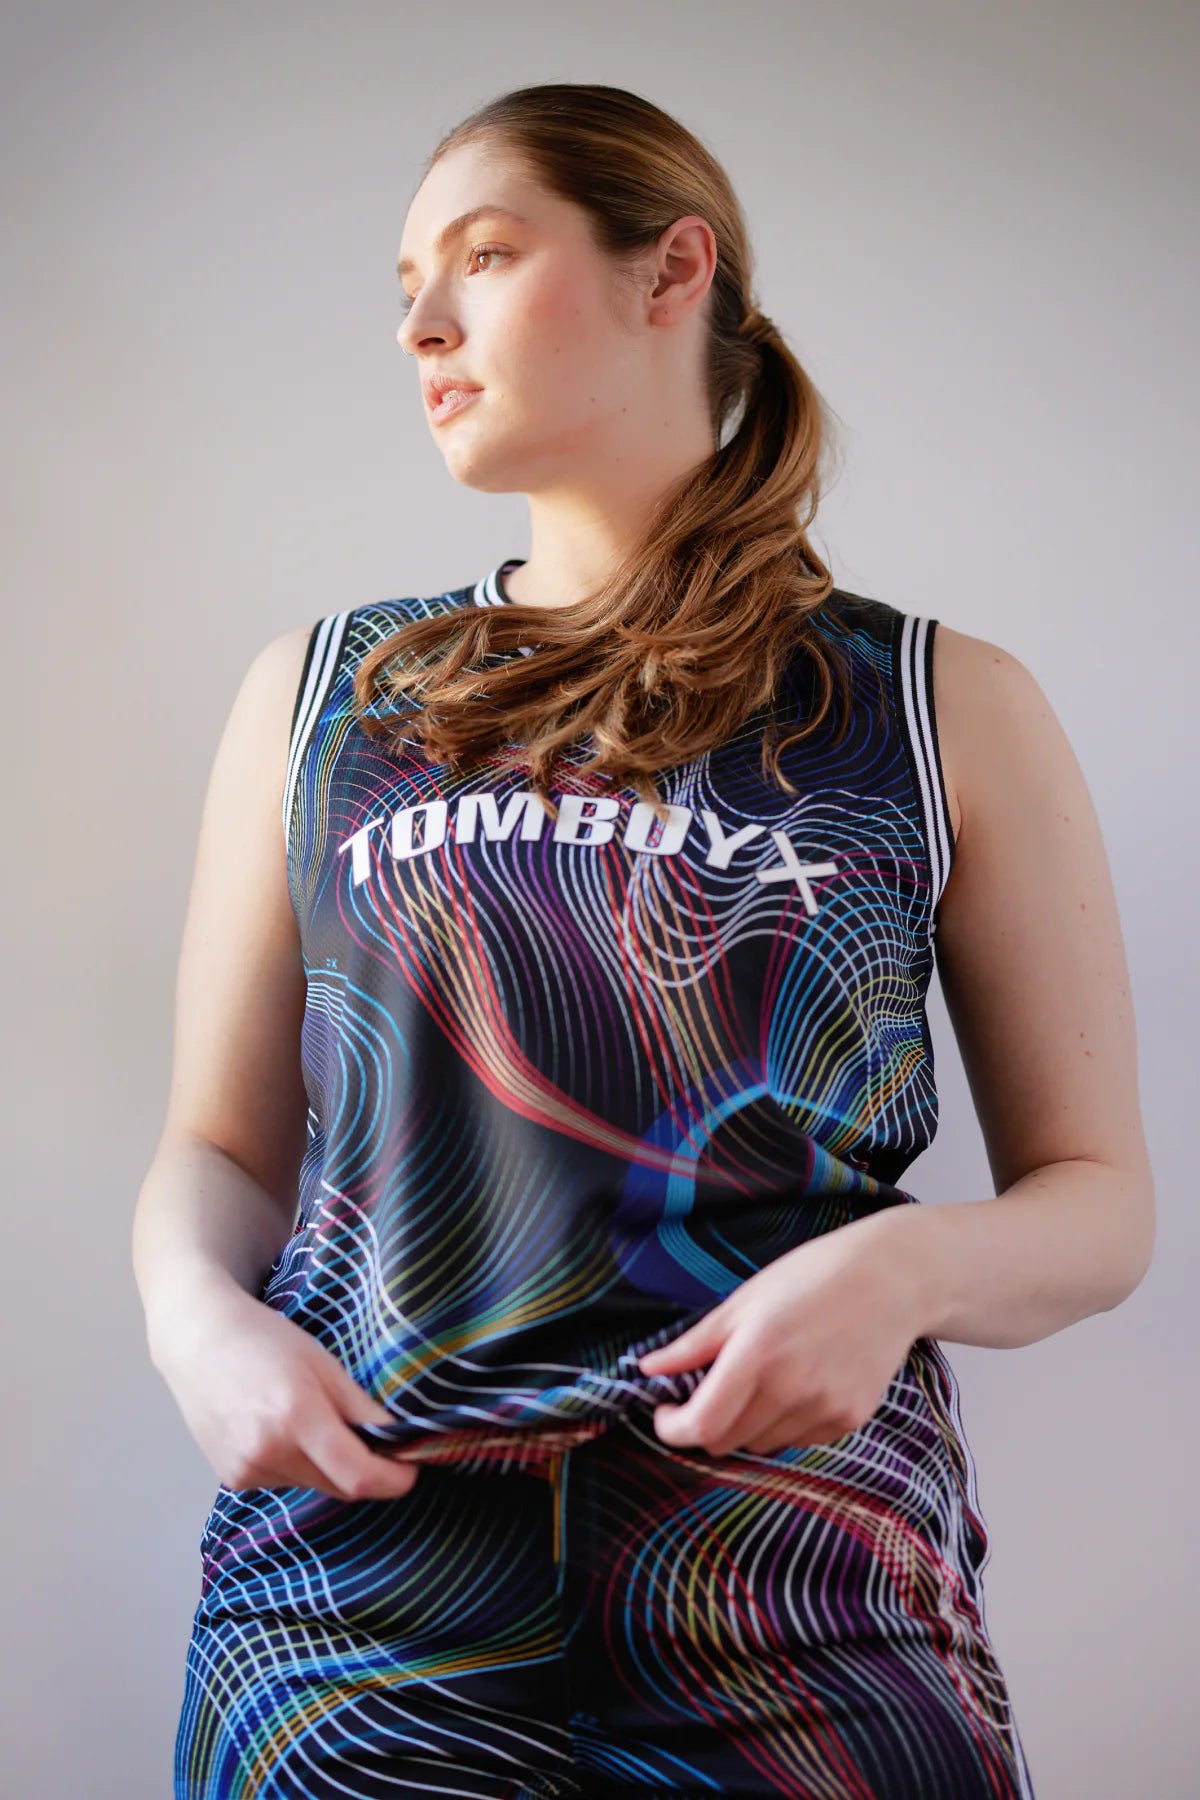 Basketball Jersey LC - Laser Show